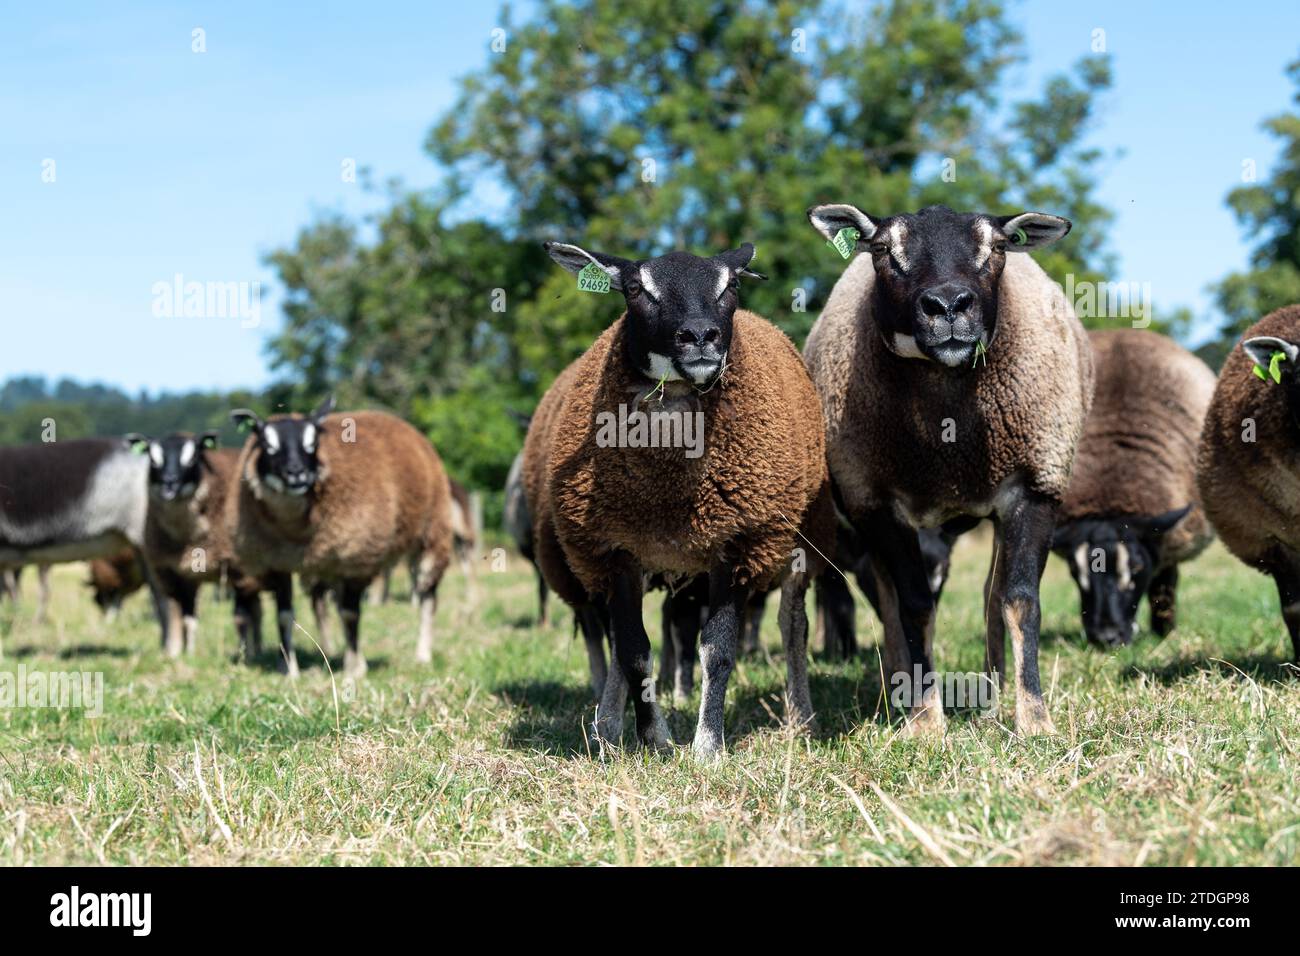 Badger Faced Texel sheep, a Dutch breed imported into the UK. Stock Photo